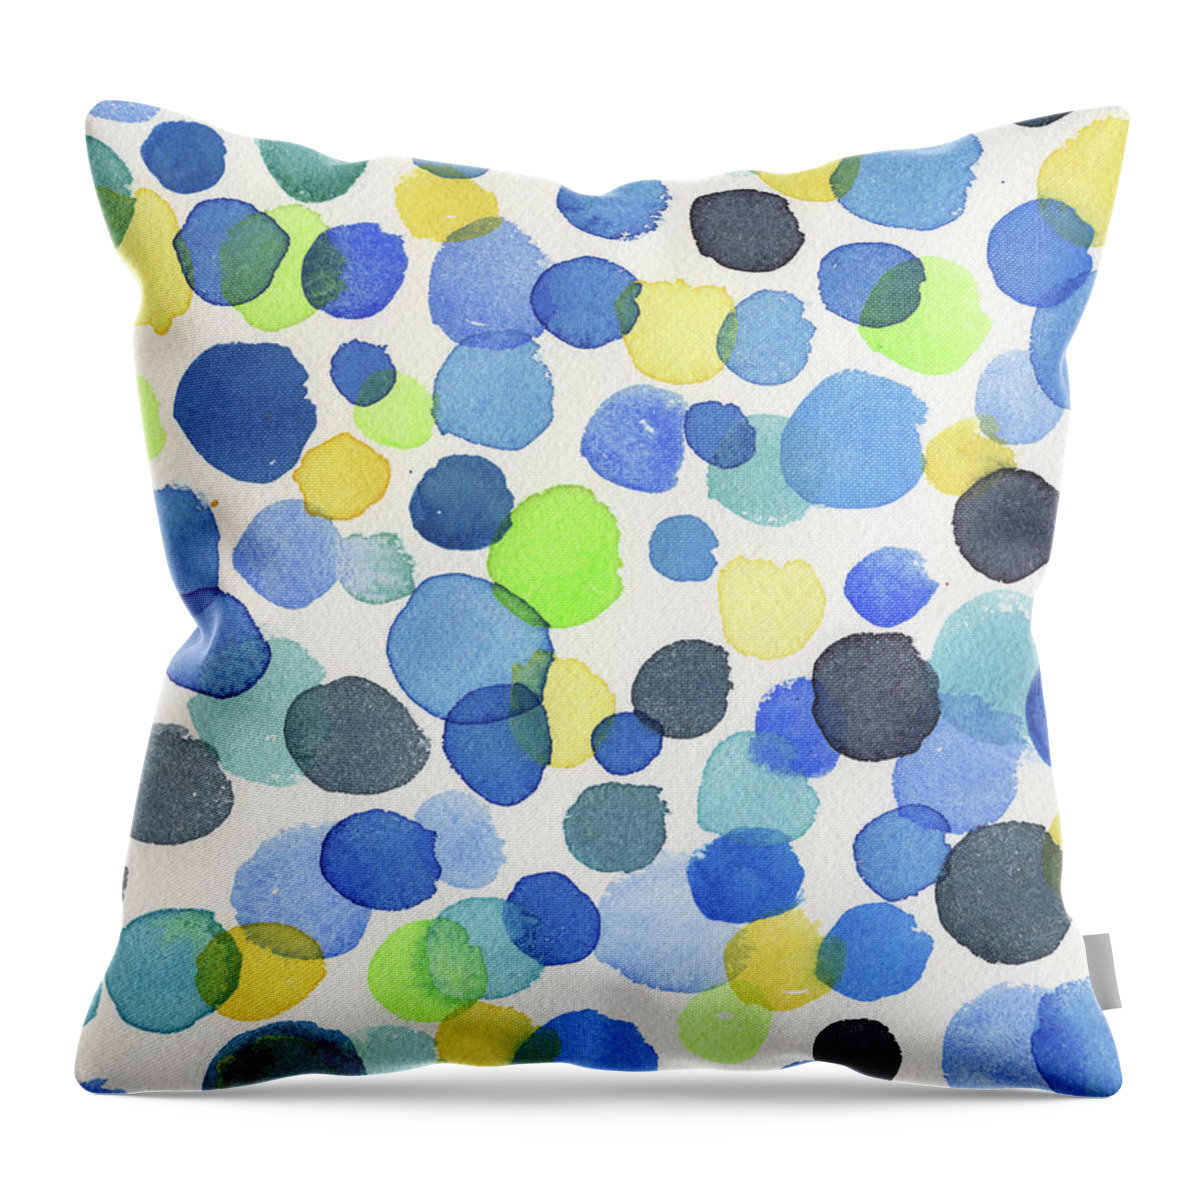 Watercolor Dots Throw Pillow featuring the painting Abstract Watercolor Dots III by Irina Sztukowski